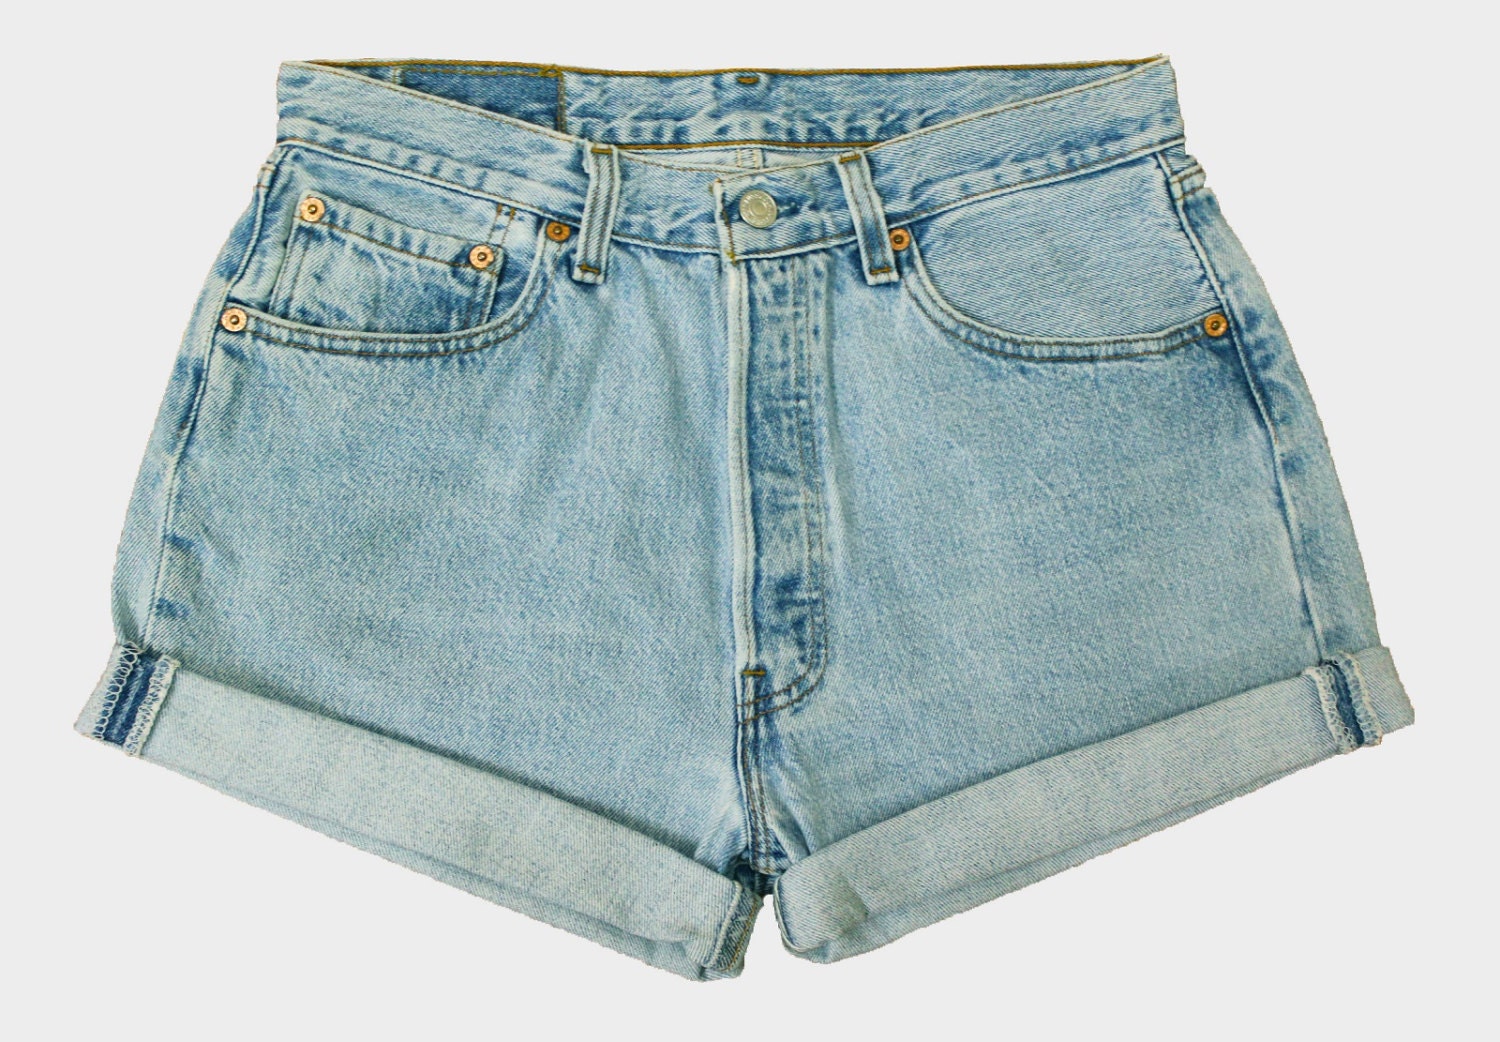 ALL SIZES – Vintage Levis 501’s Roll Up / Cuffed High Waisted Denim ...